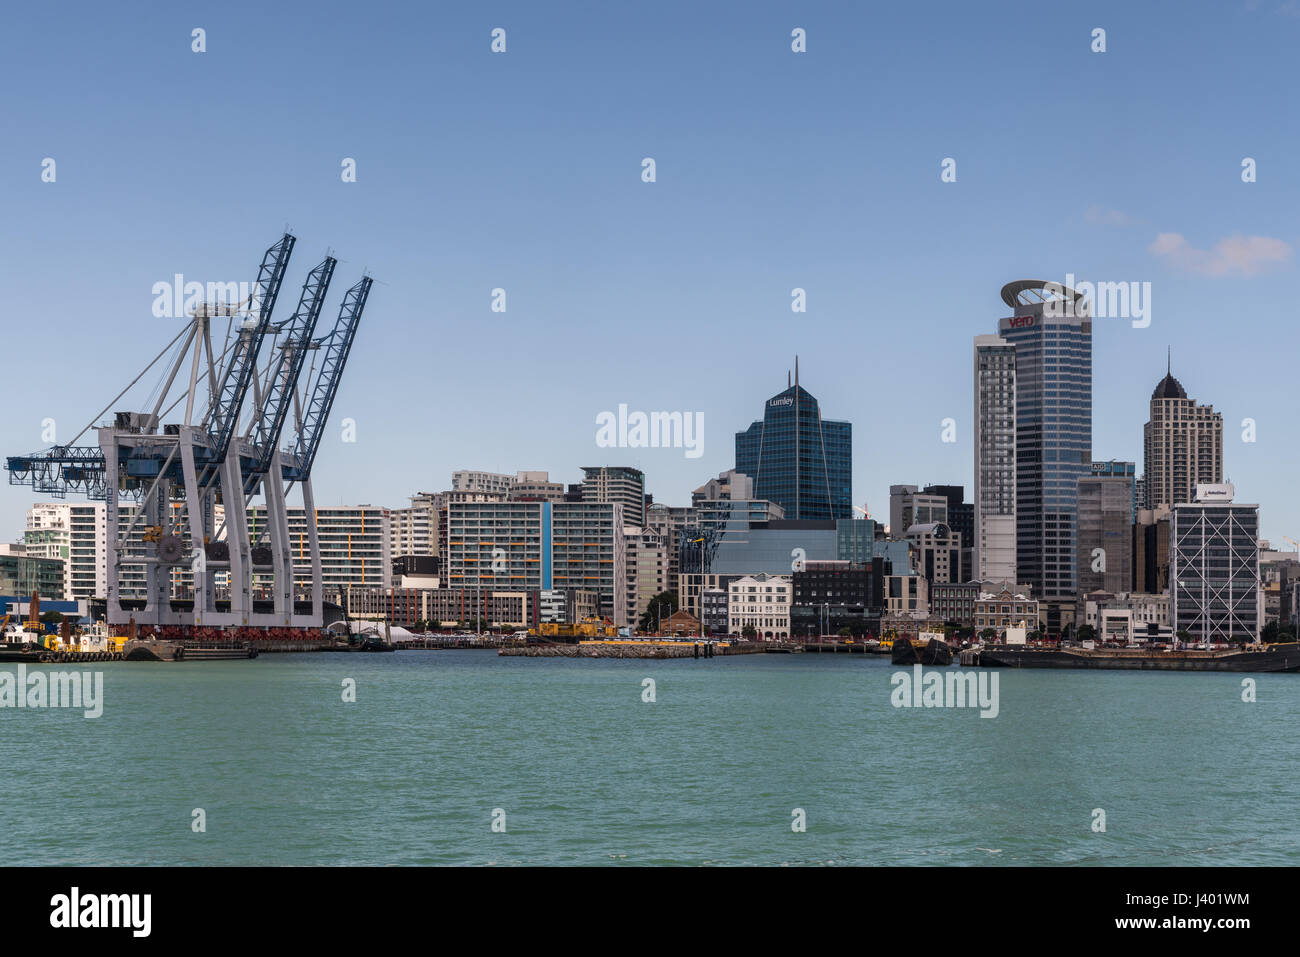 Auckland, New Zealand - March 3, 2017: Row of container cranes at Commercial Harbor with part of city skyline in back under blue sky and behind greeni Stock Photo